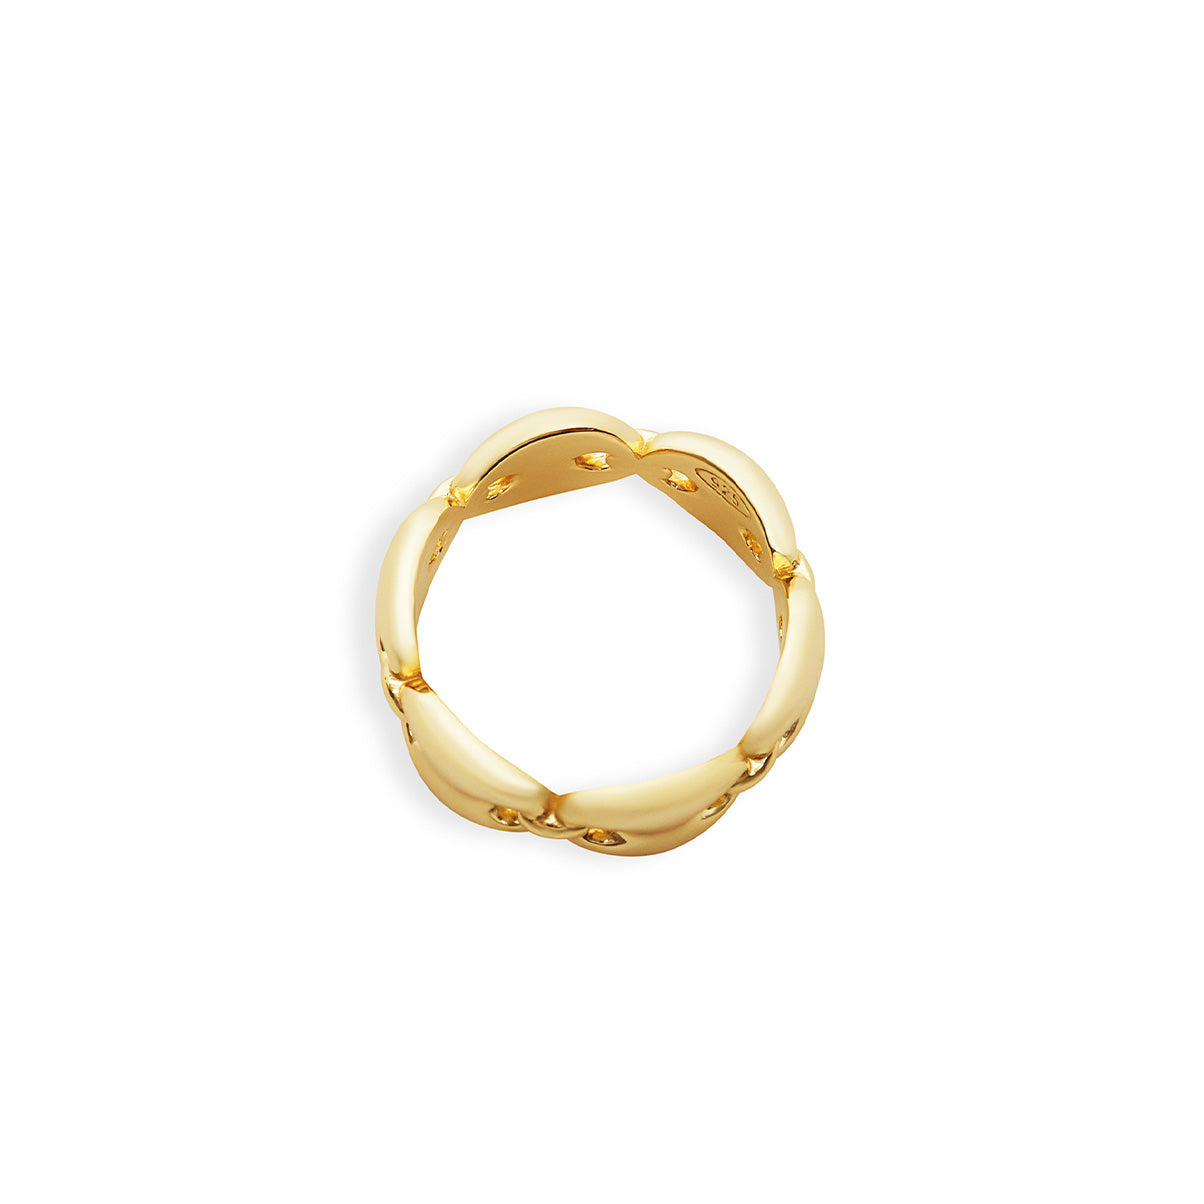 THE IRIS LINK RING – The M Jewelers